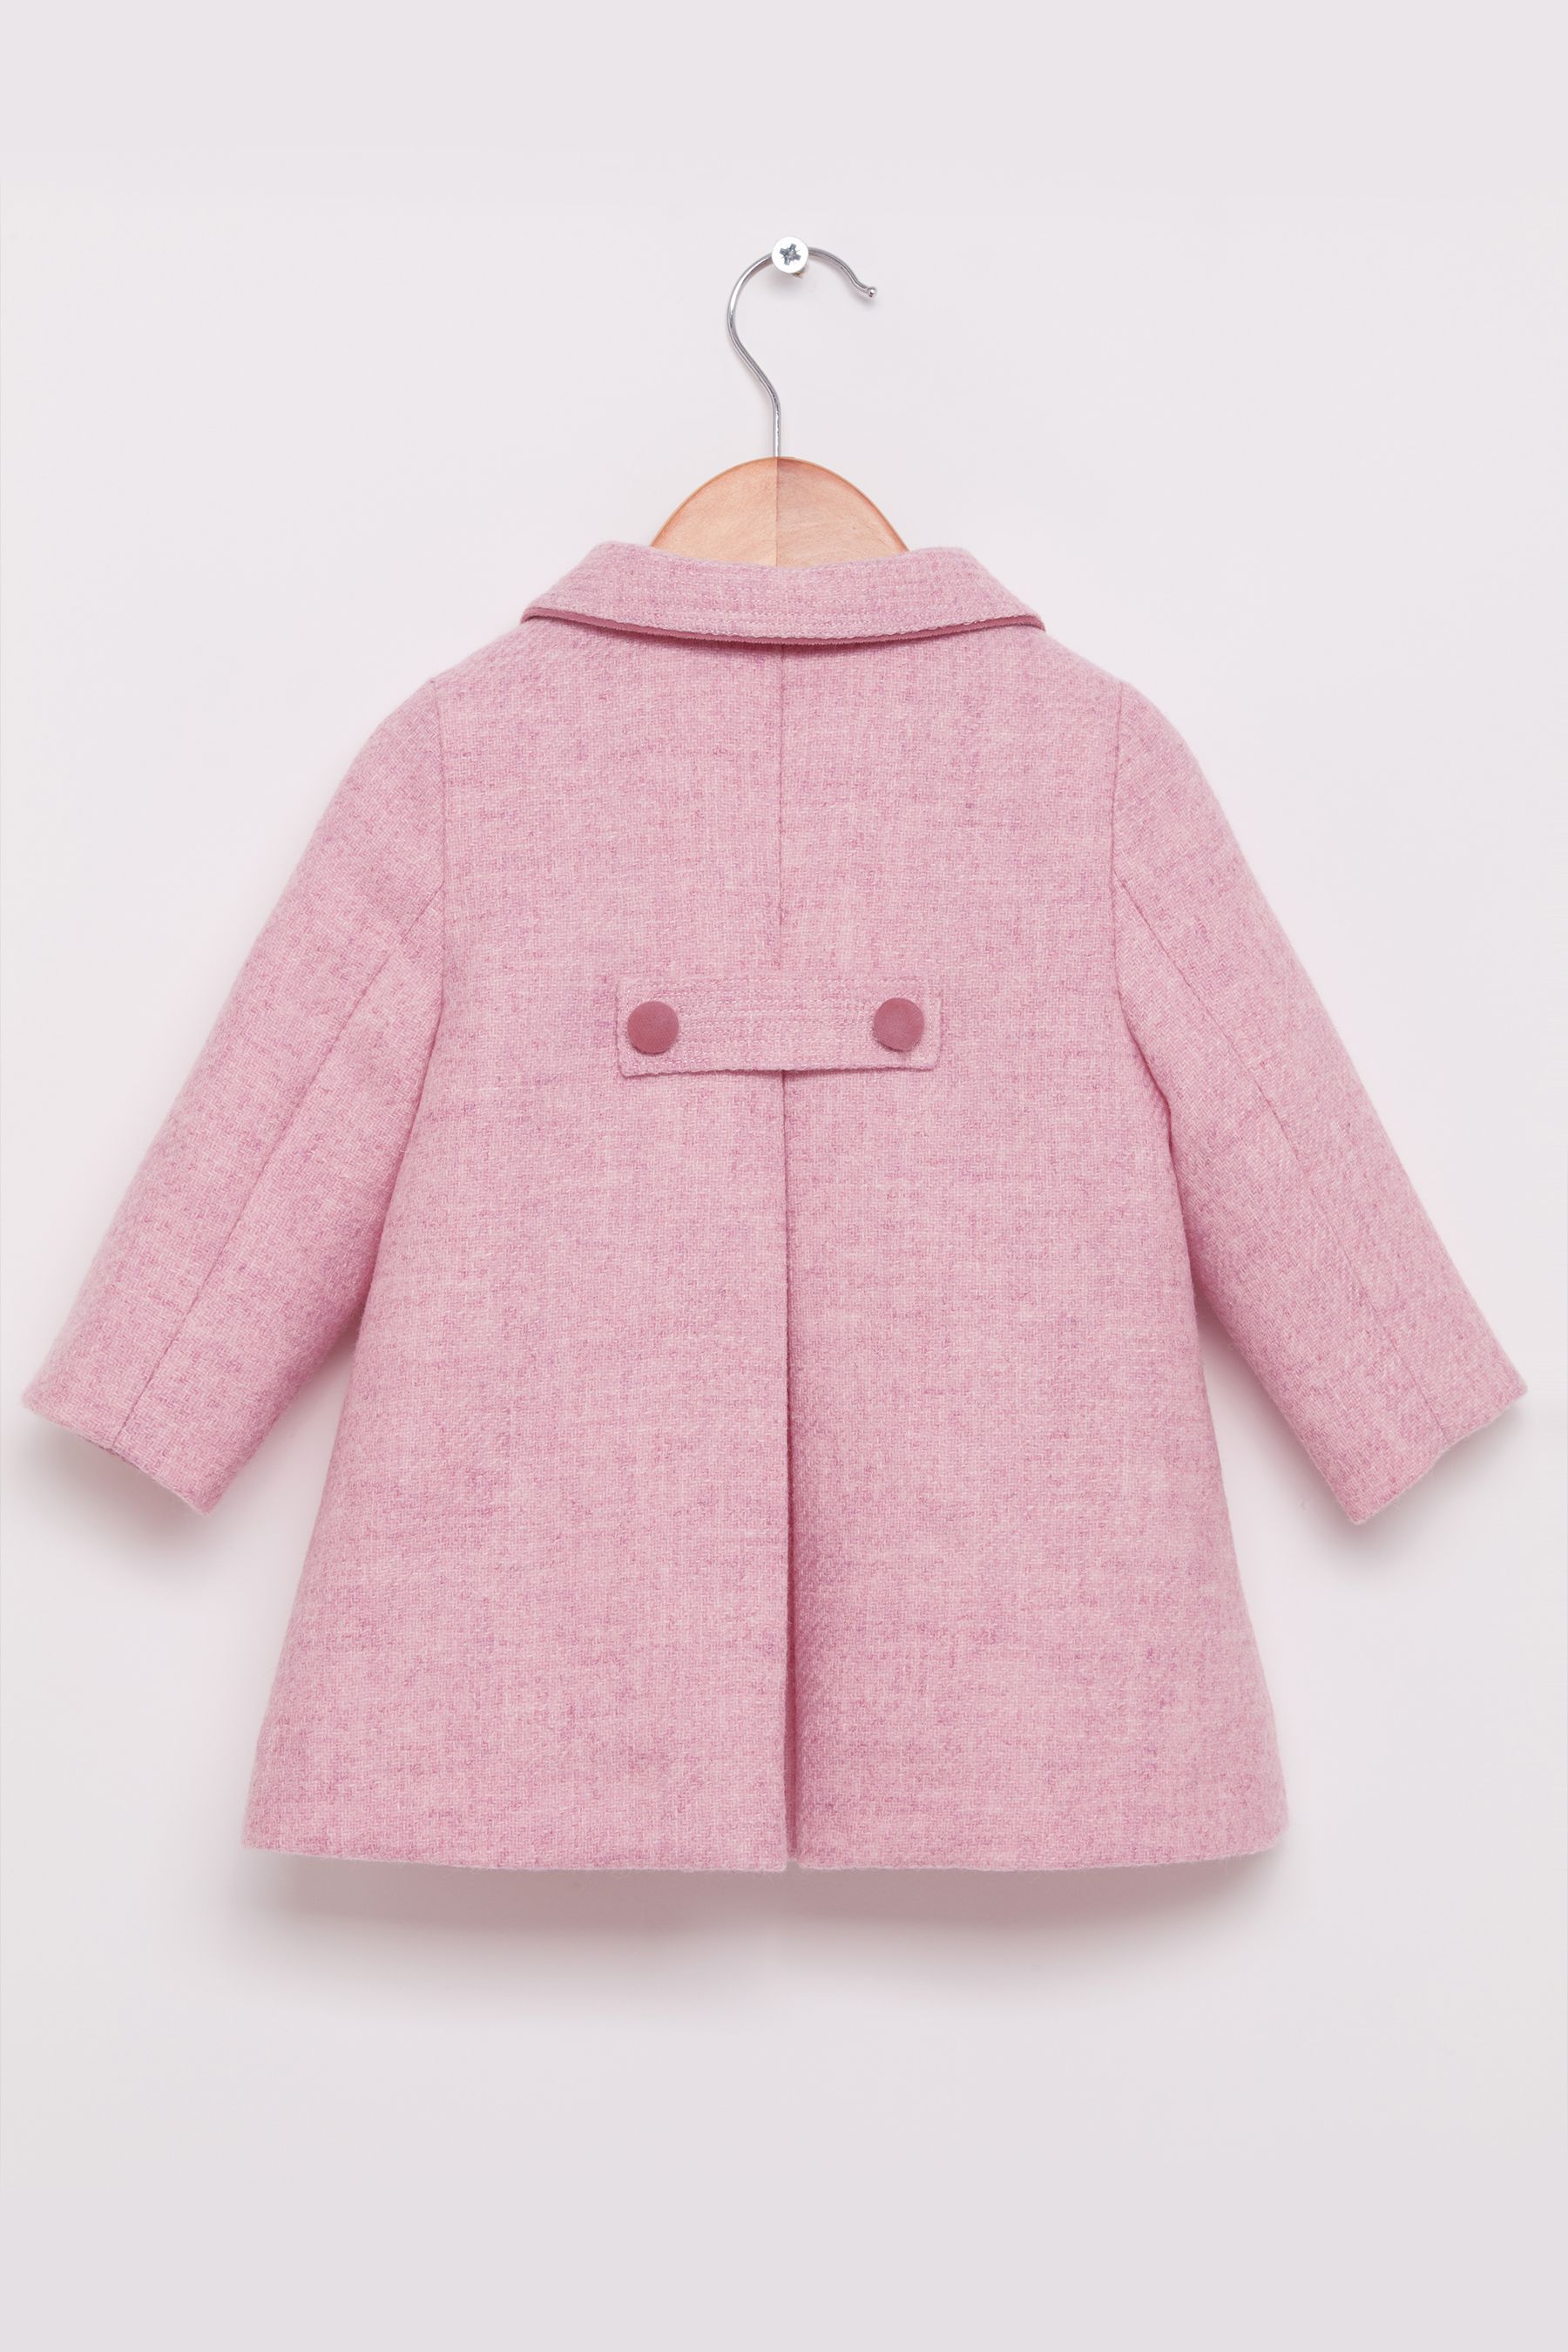 Buy Trotters London Pink Classic Coat from the Next UK online shop